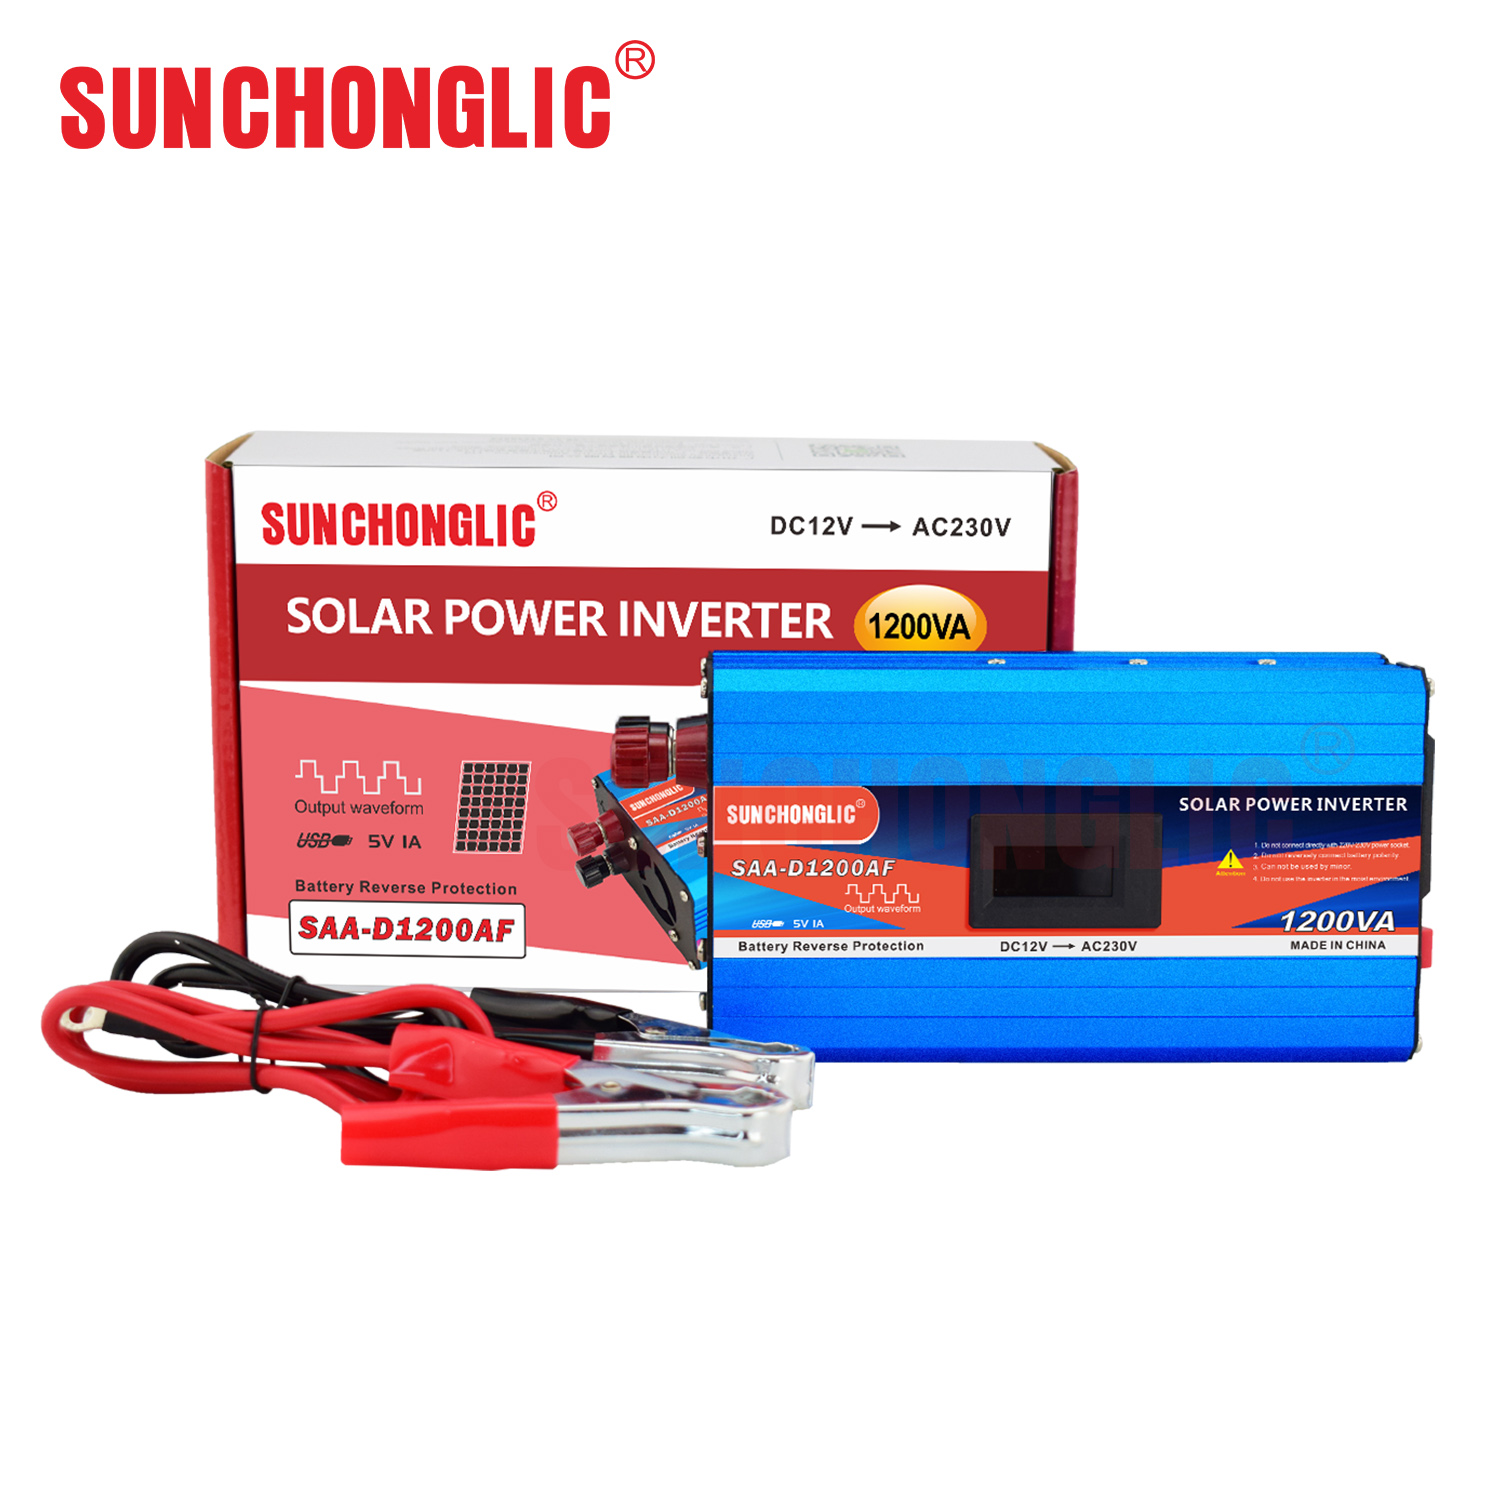 Electric - - Foshan SAA-D1200AF Modified Sunchonglic Appliance Wave Inverter Co., Sine